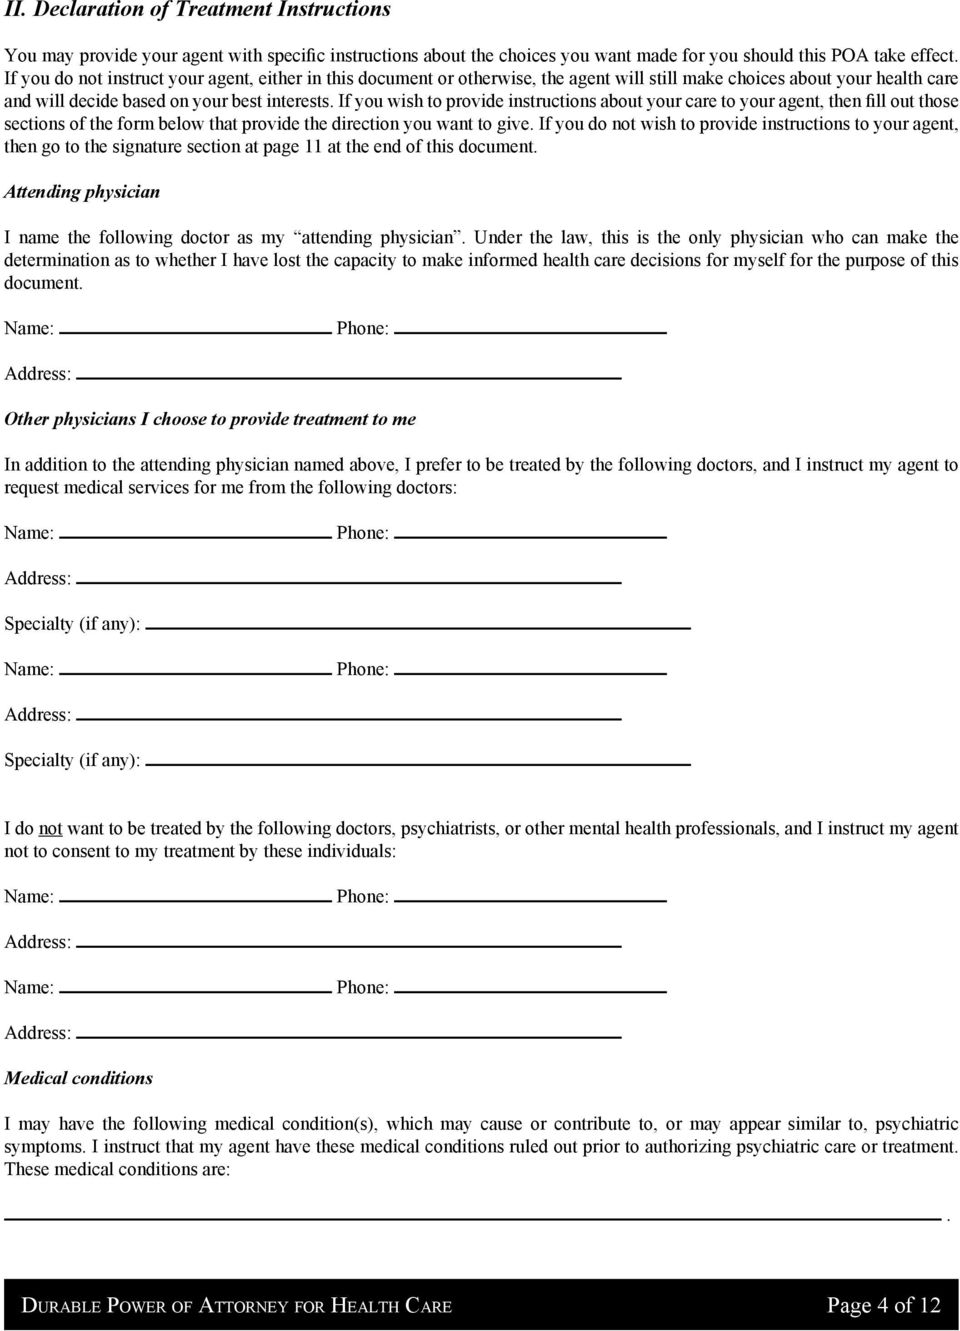 agent, then fill out those sections of the form below that provide the direction you want to give If you do not wish to provide instructions to your agent, then go to the signature section at page 11